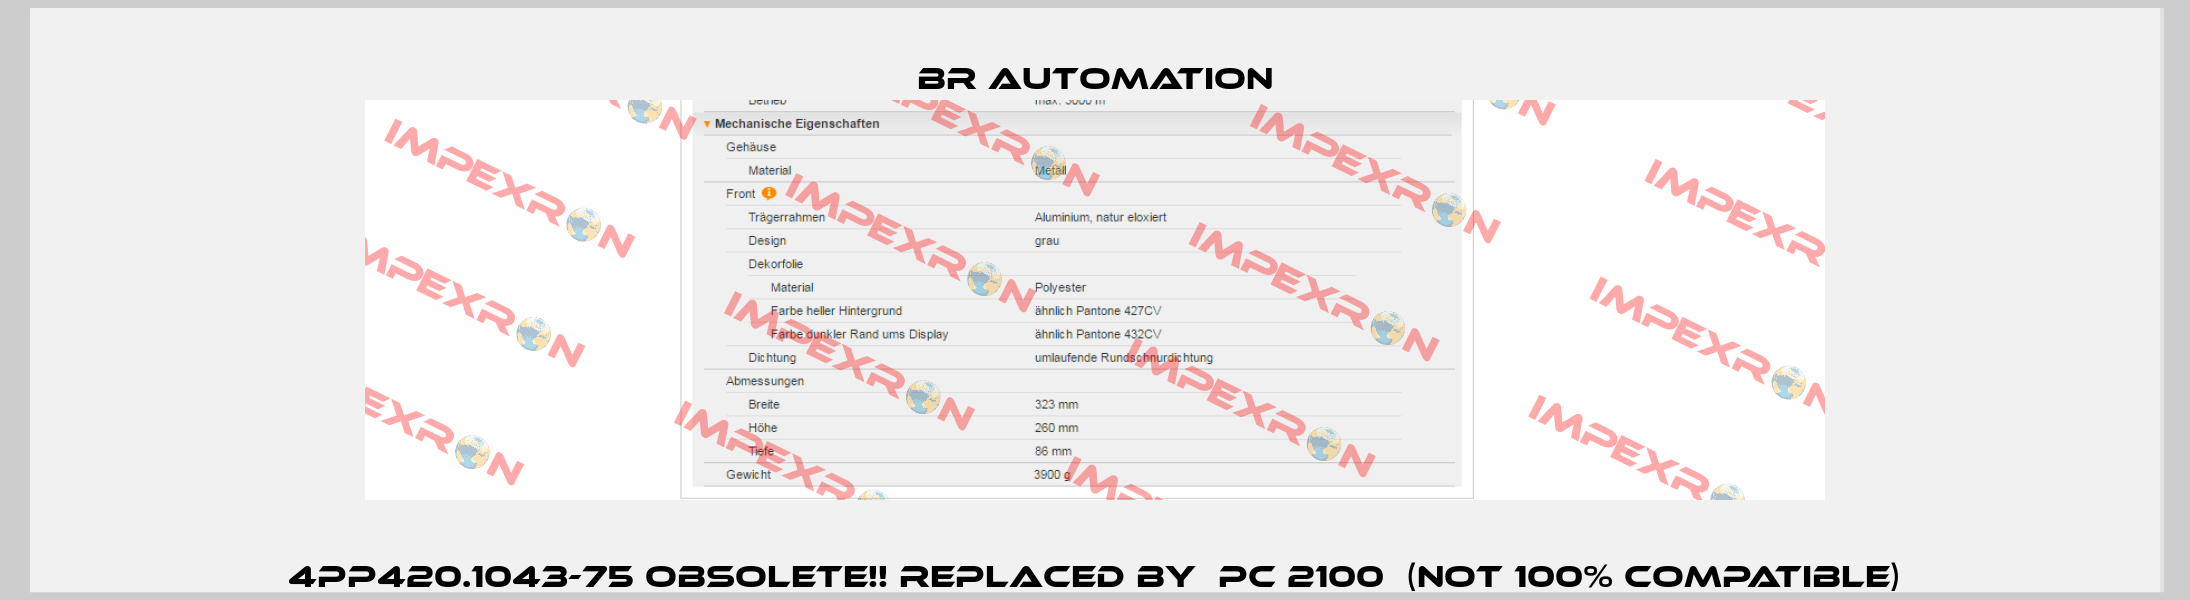 4PP420.1043-75 Obsolete!! Replaced by  PC 2100  (not 100% compatible) Br Automation